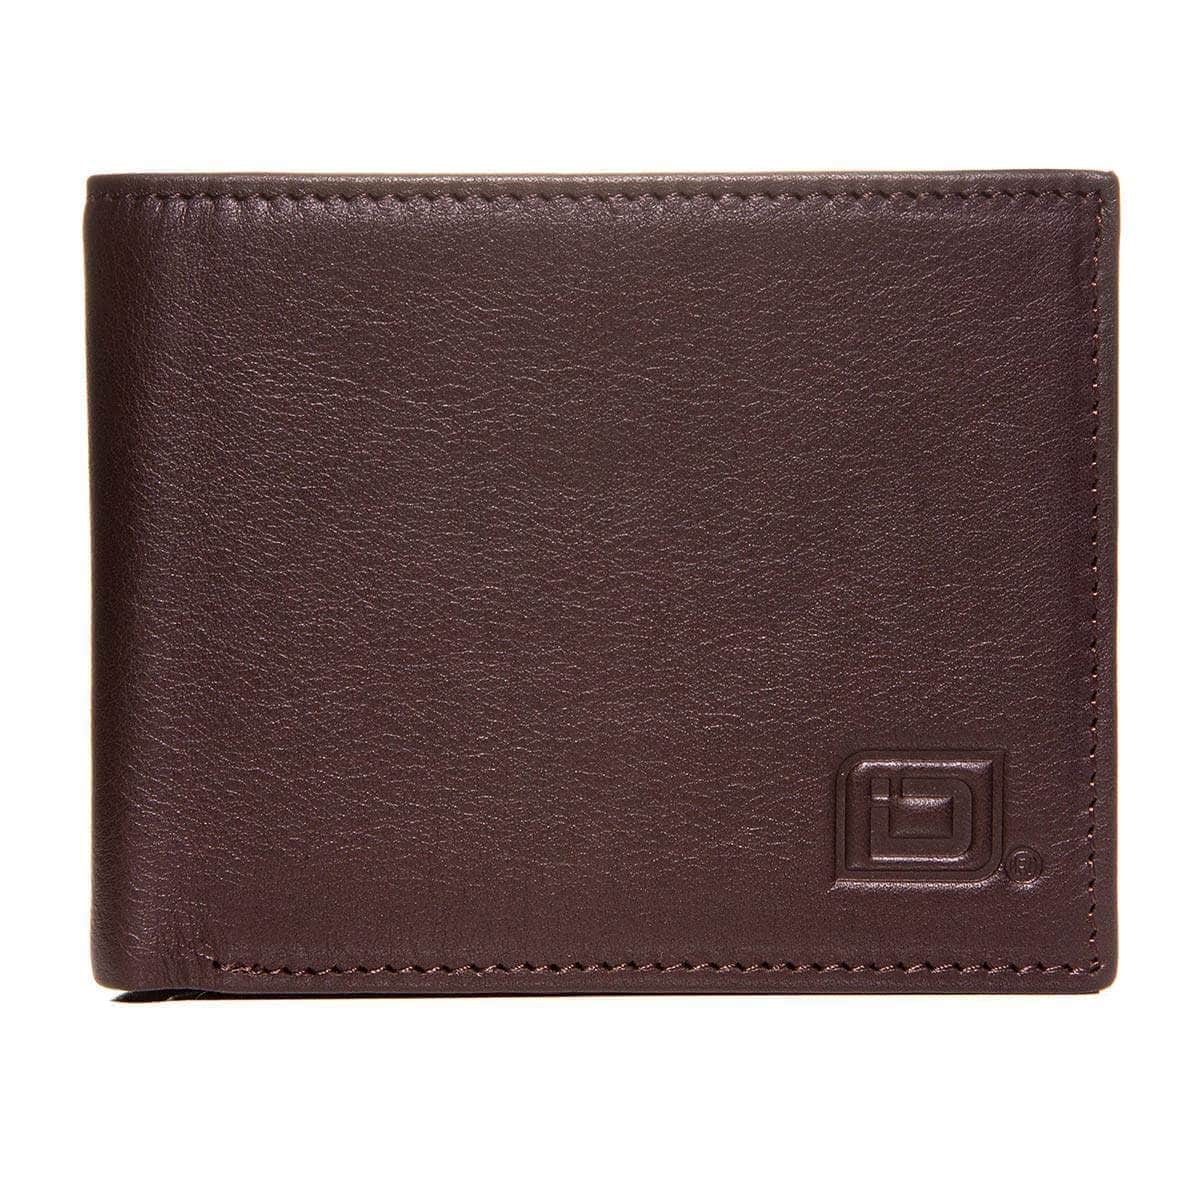 ID Stronghold Men's Wallet Mens RFID Wallet -  10 Slot Bifold Wallet with ID Window